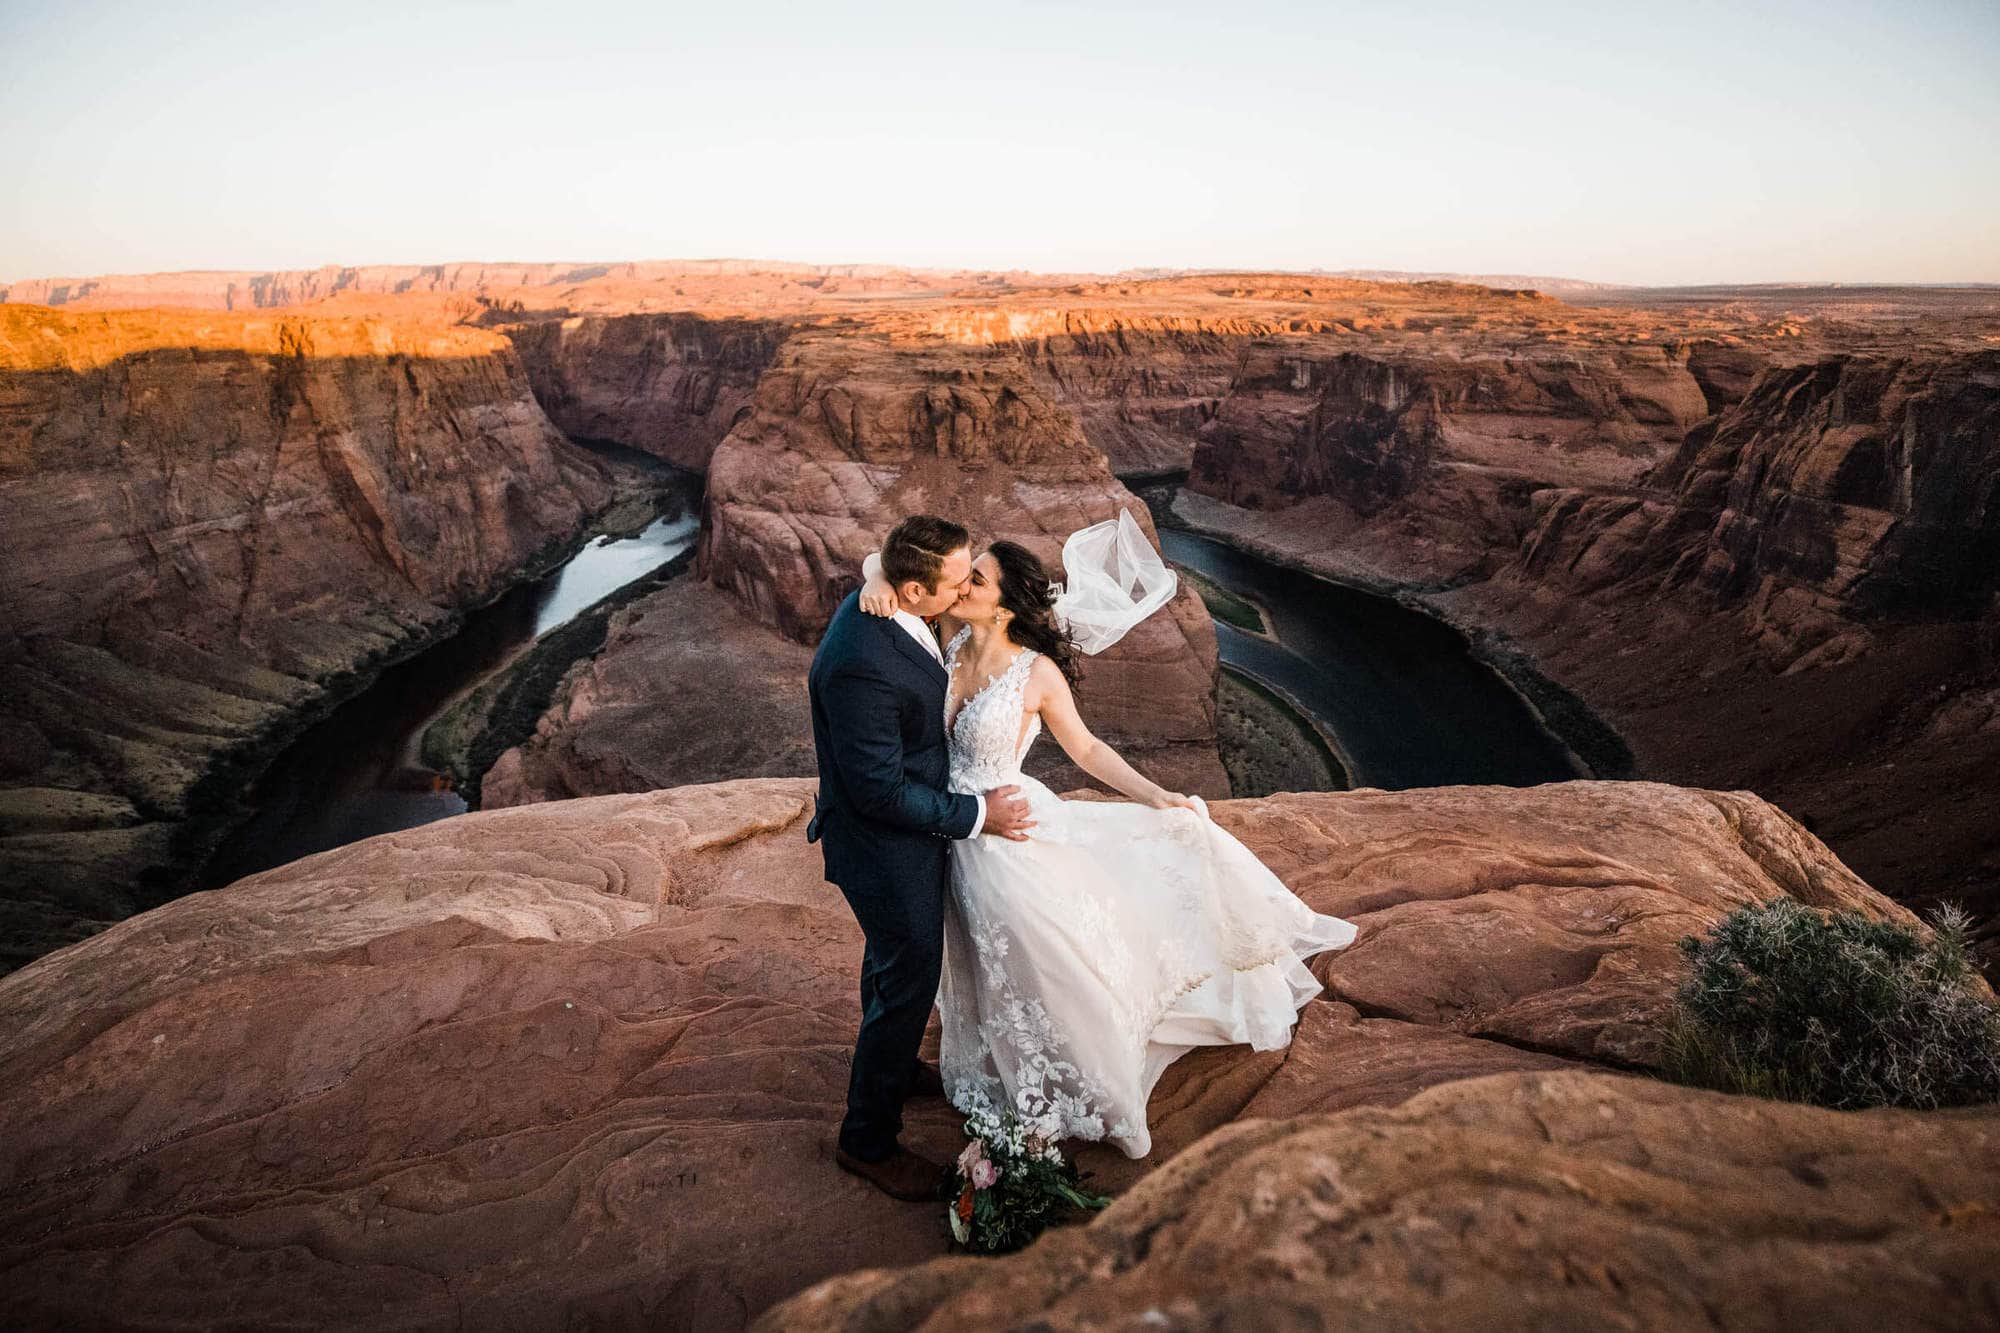 Horseshoe Bend is iconic, popular, and crowded spot. But this sunrise start meant this Horseshoe Bend elopement was all the views + no crowds. 